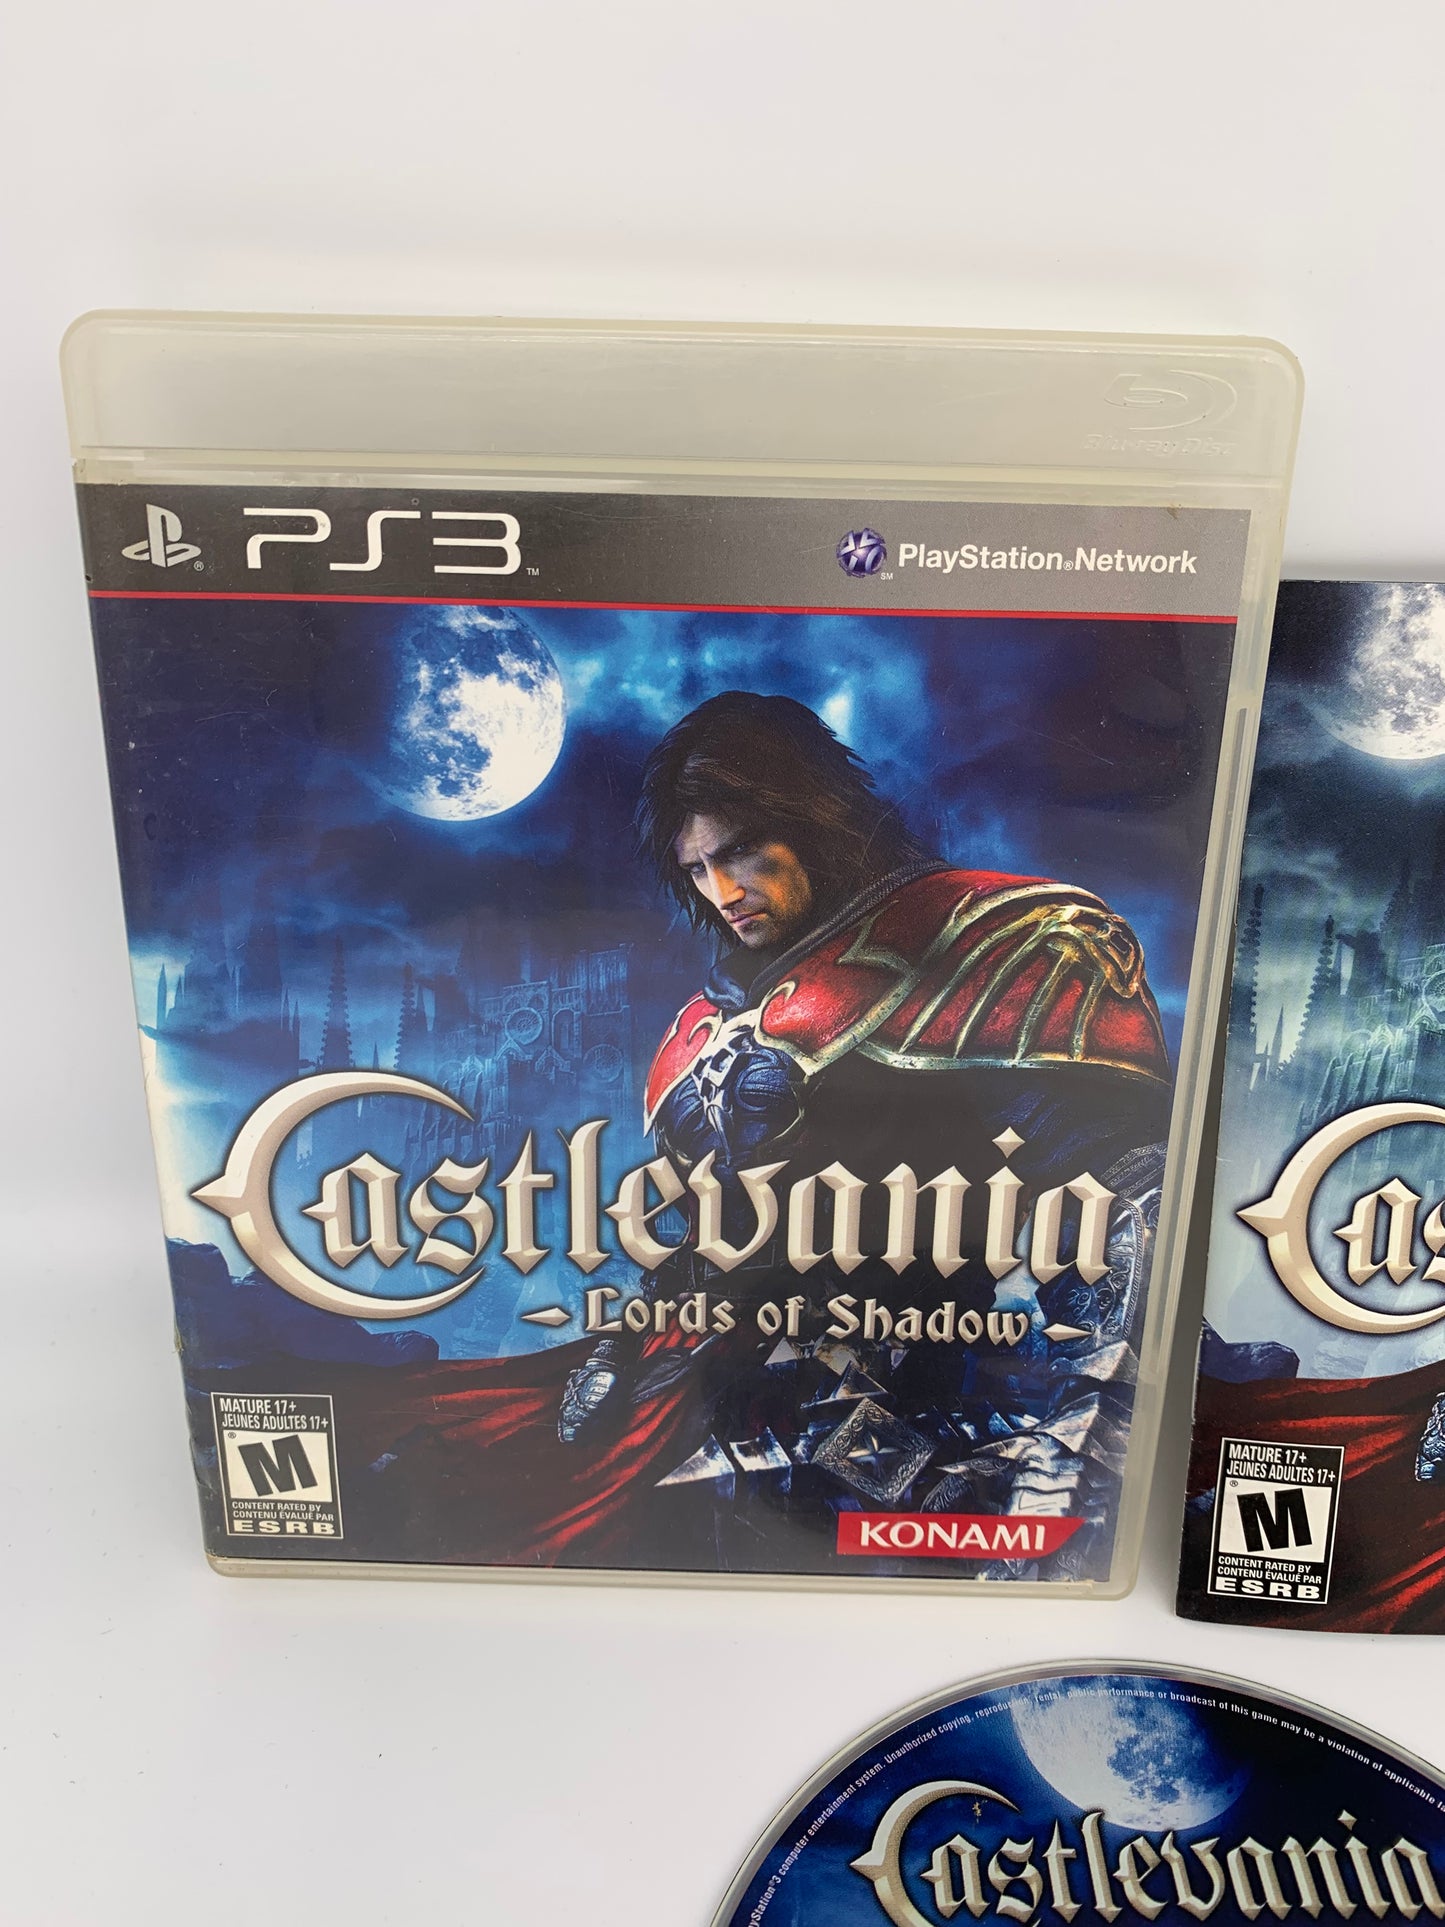 SONY PLAYSTATiON 3 [PS3] | CASTLEVANiA LORDS OF SHADOW